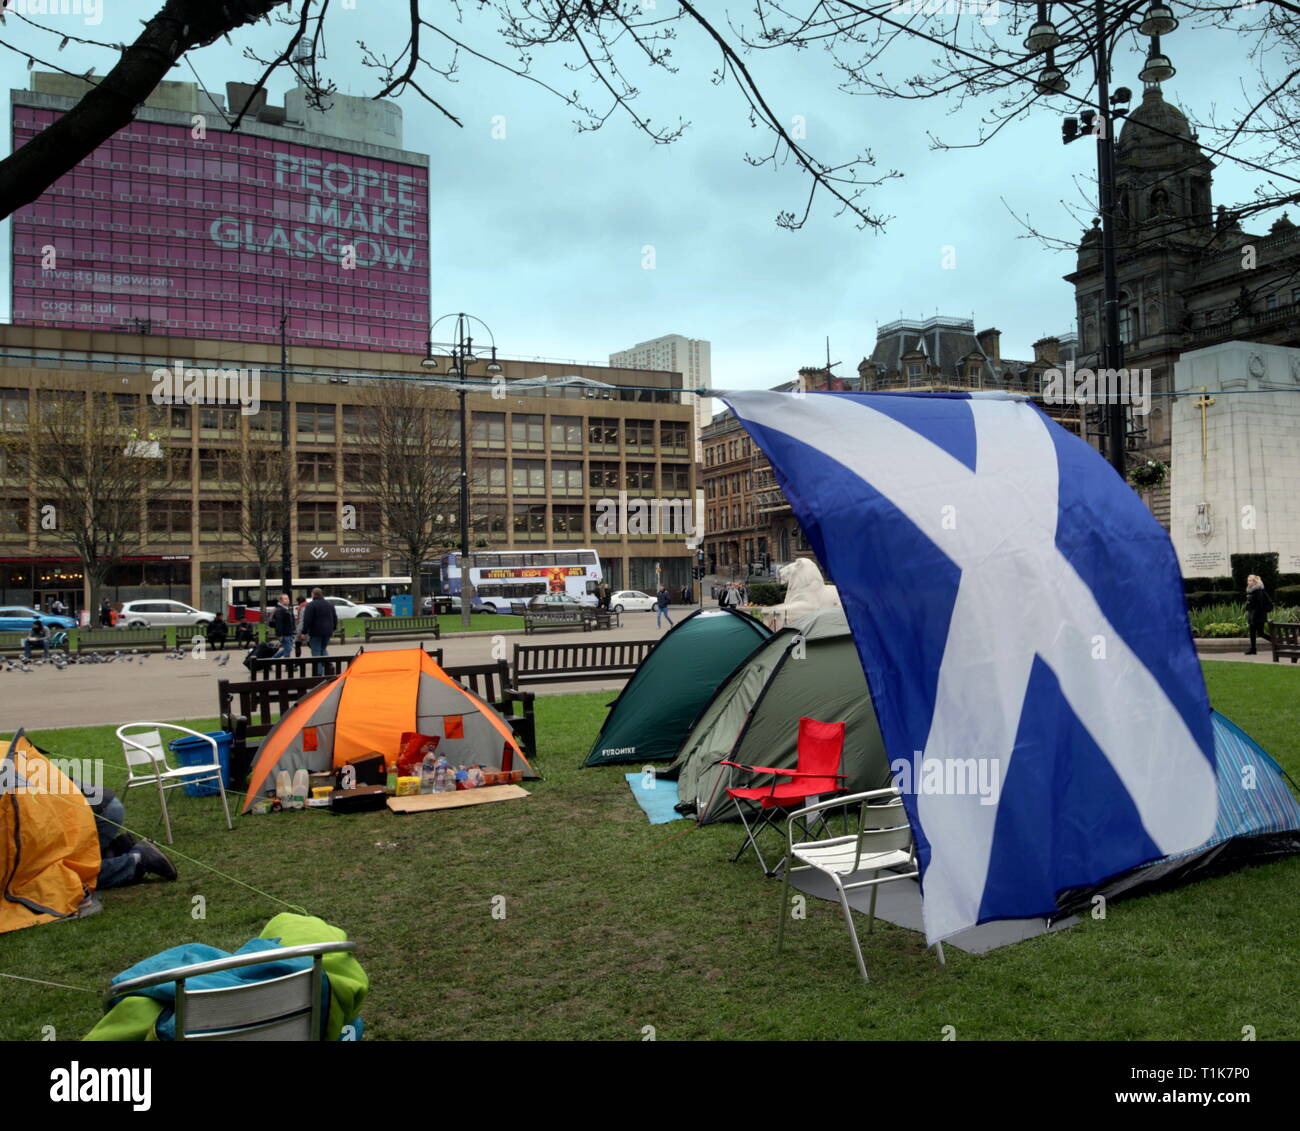 Glasgow, Scotland, UK. 27th Mar, 2019. Homeless people demonstrating by  camping on the lawns outside the city's council chambers in George Square  say they will be there for two months if the